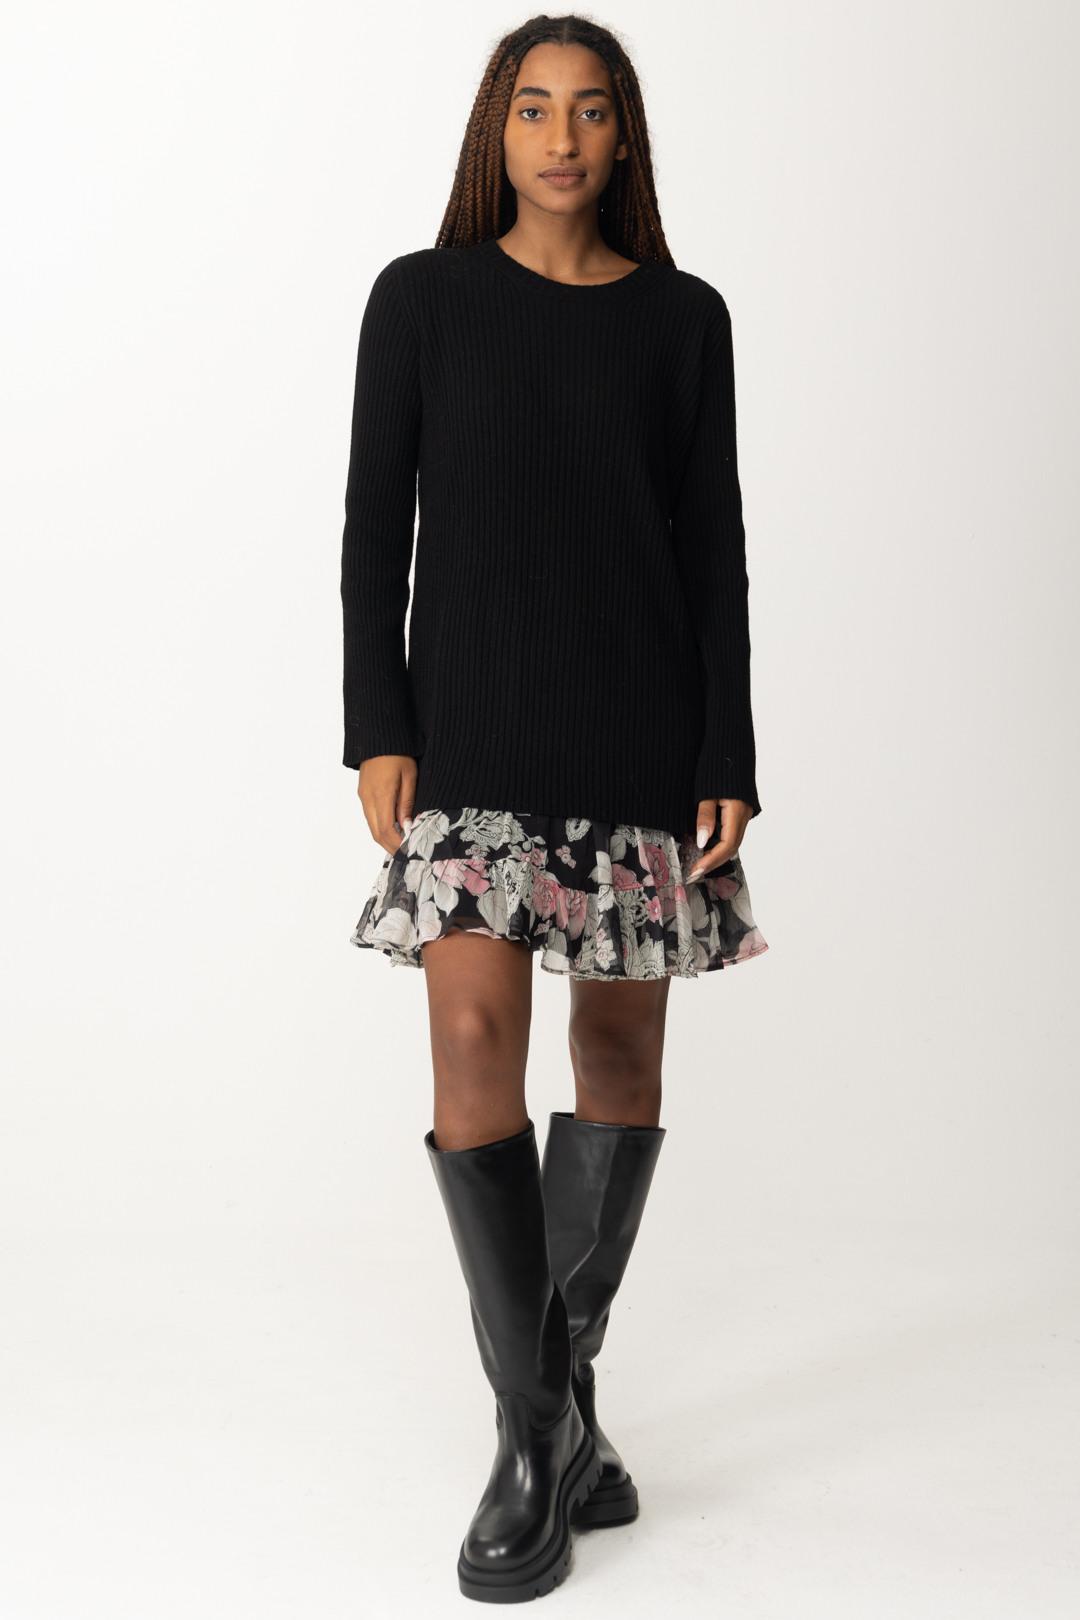 Preview: Twin-Set Alpaca-blend knit dress wiht petticoat NERO/STAMPA CACHEMIRE AND ROSE